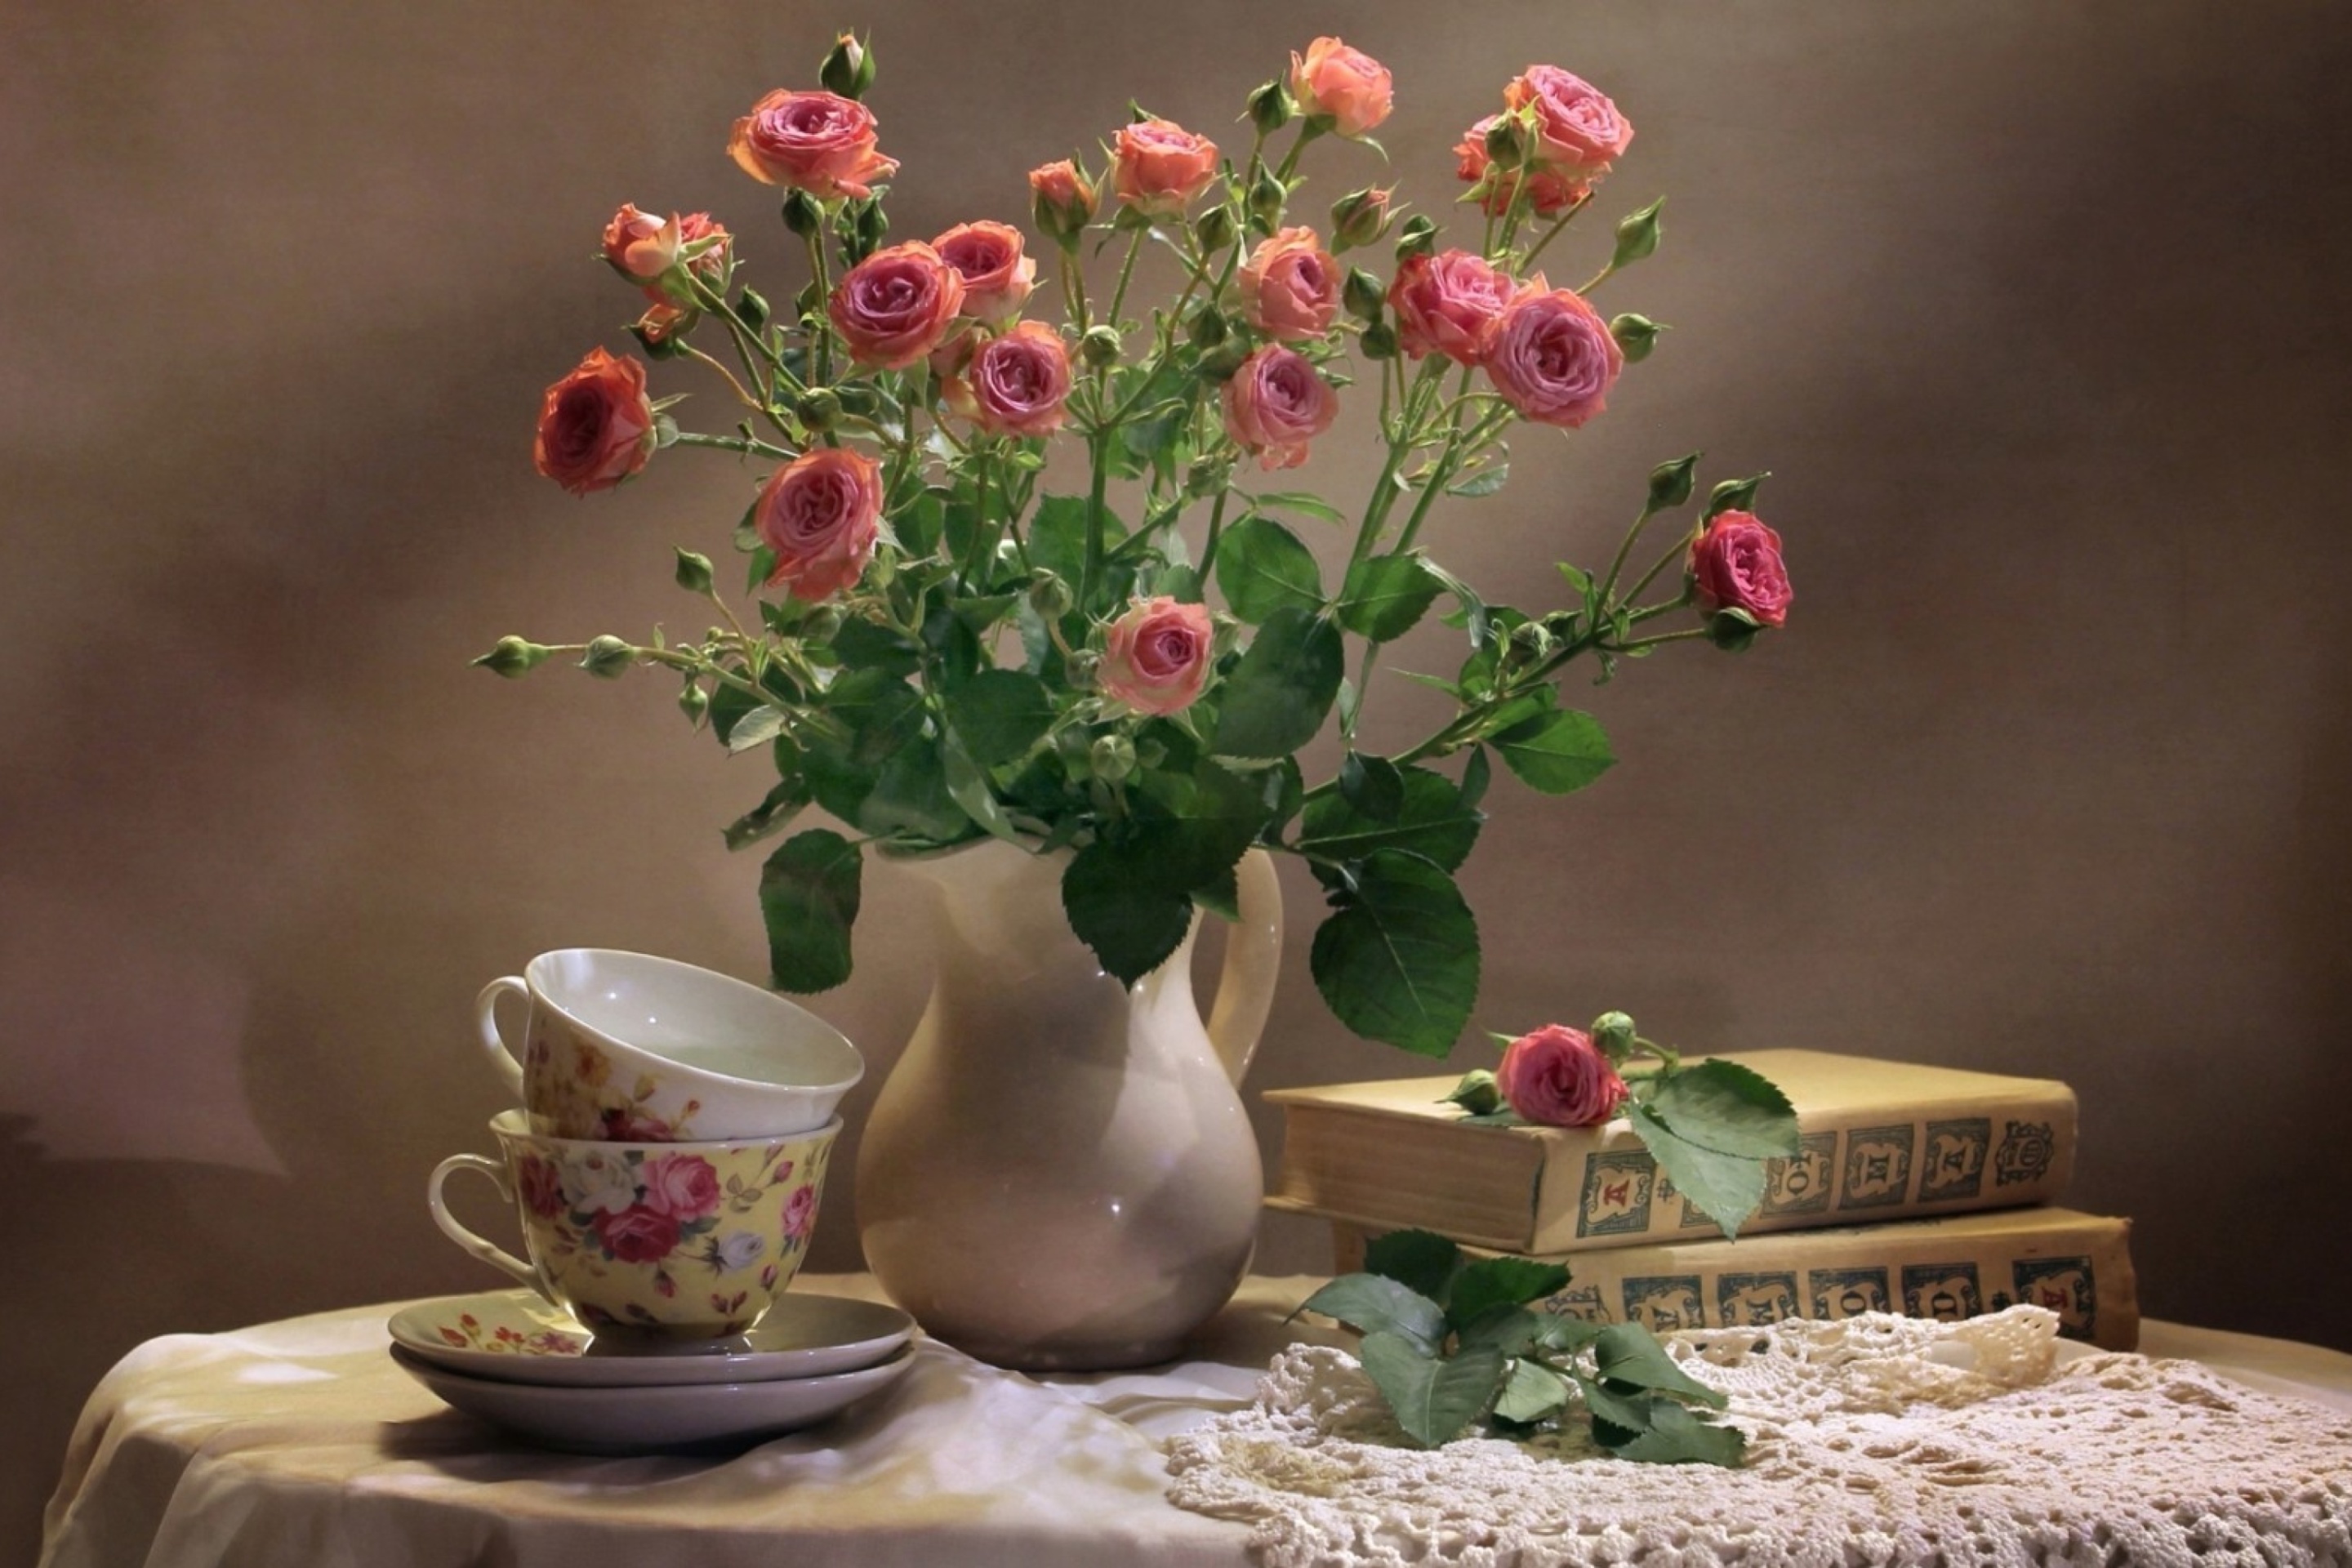 Das Still life of vintage books and roses Wallpaper 2880x1920